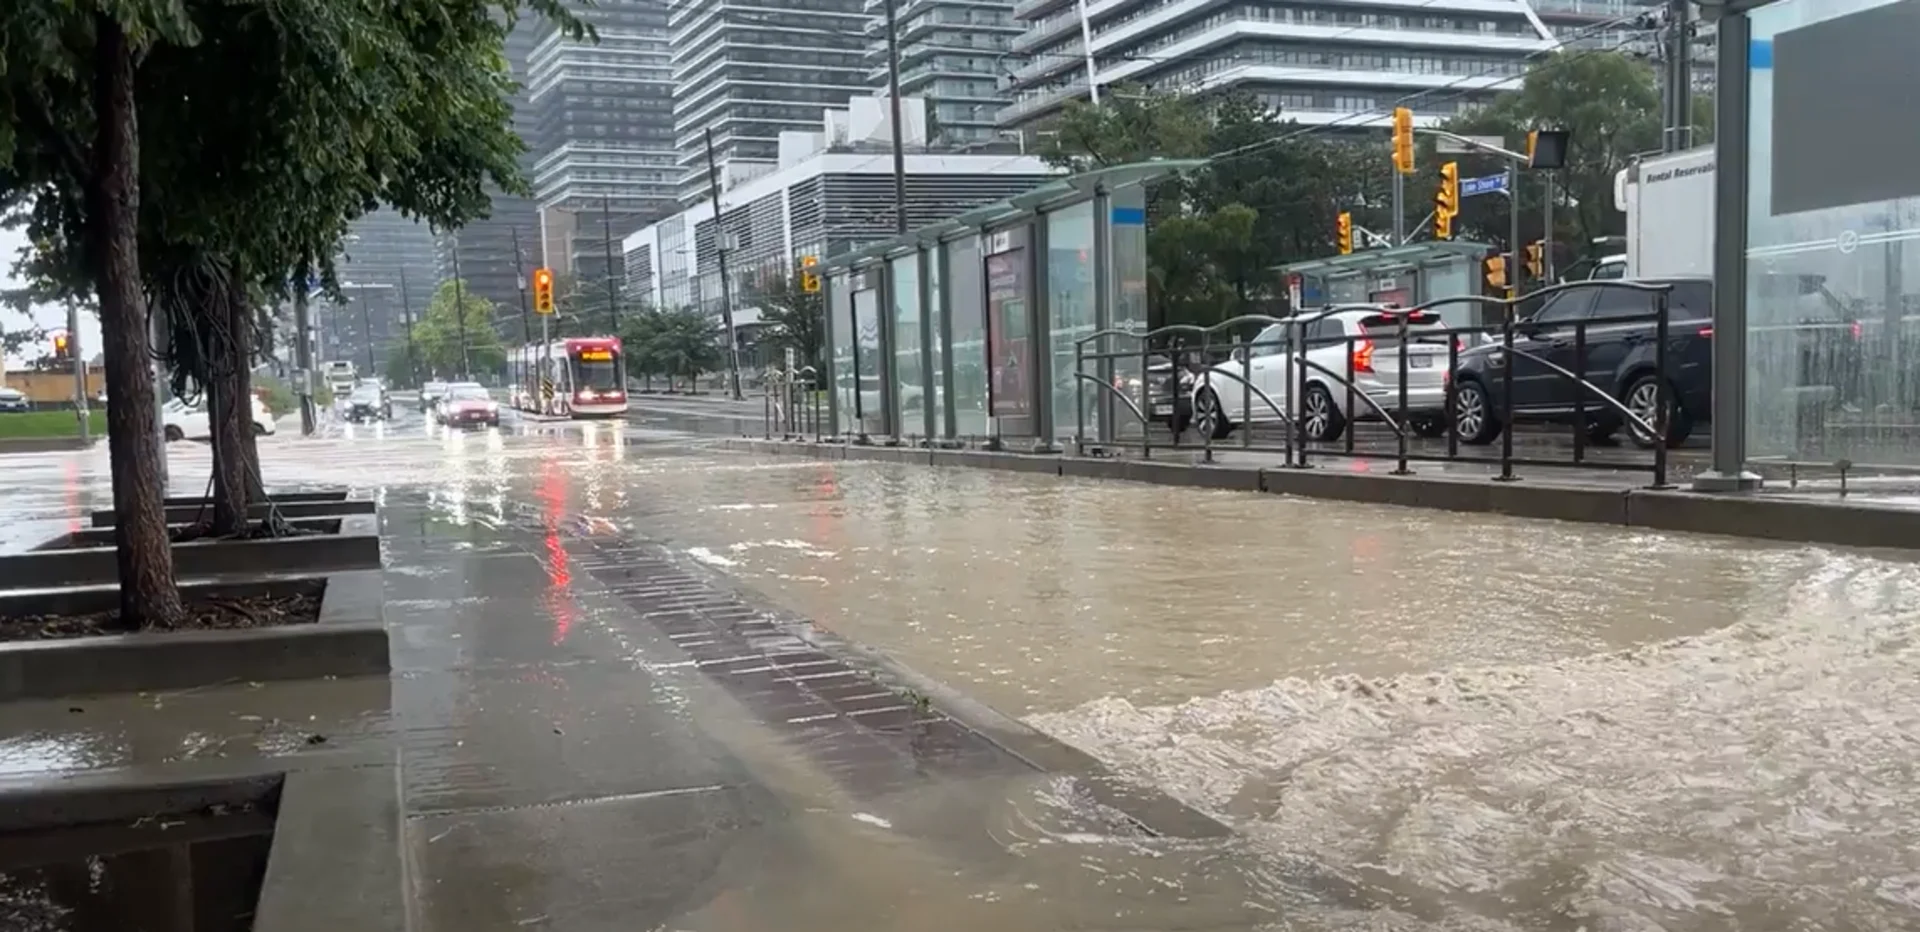 PHOTOS: Another round of torrential rain hits southern Ontario